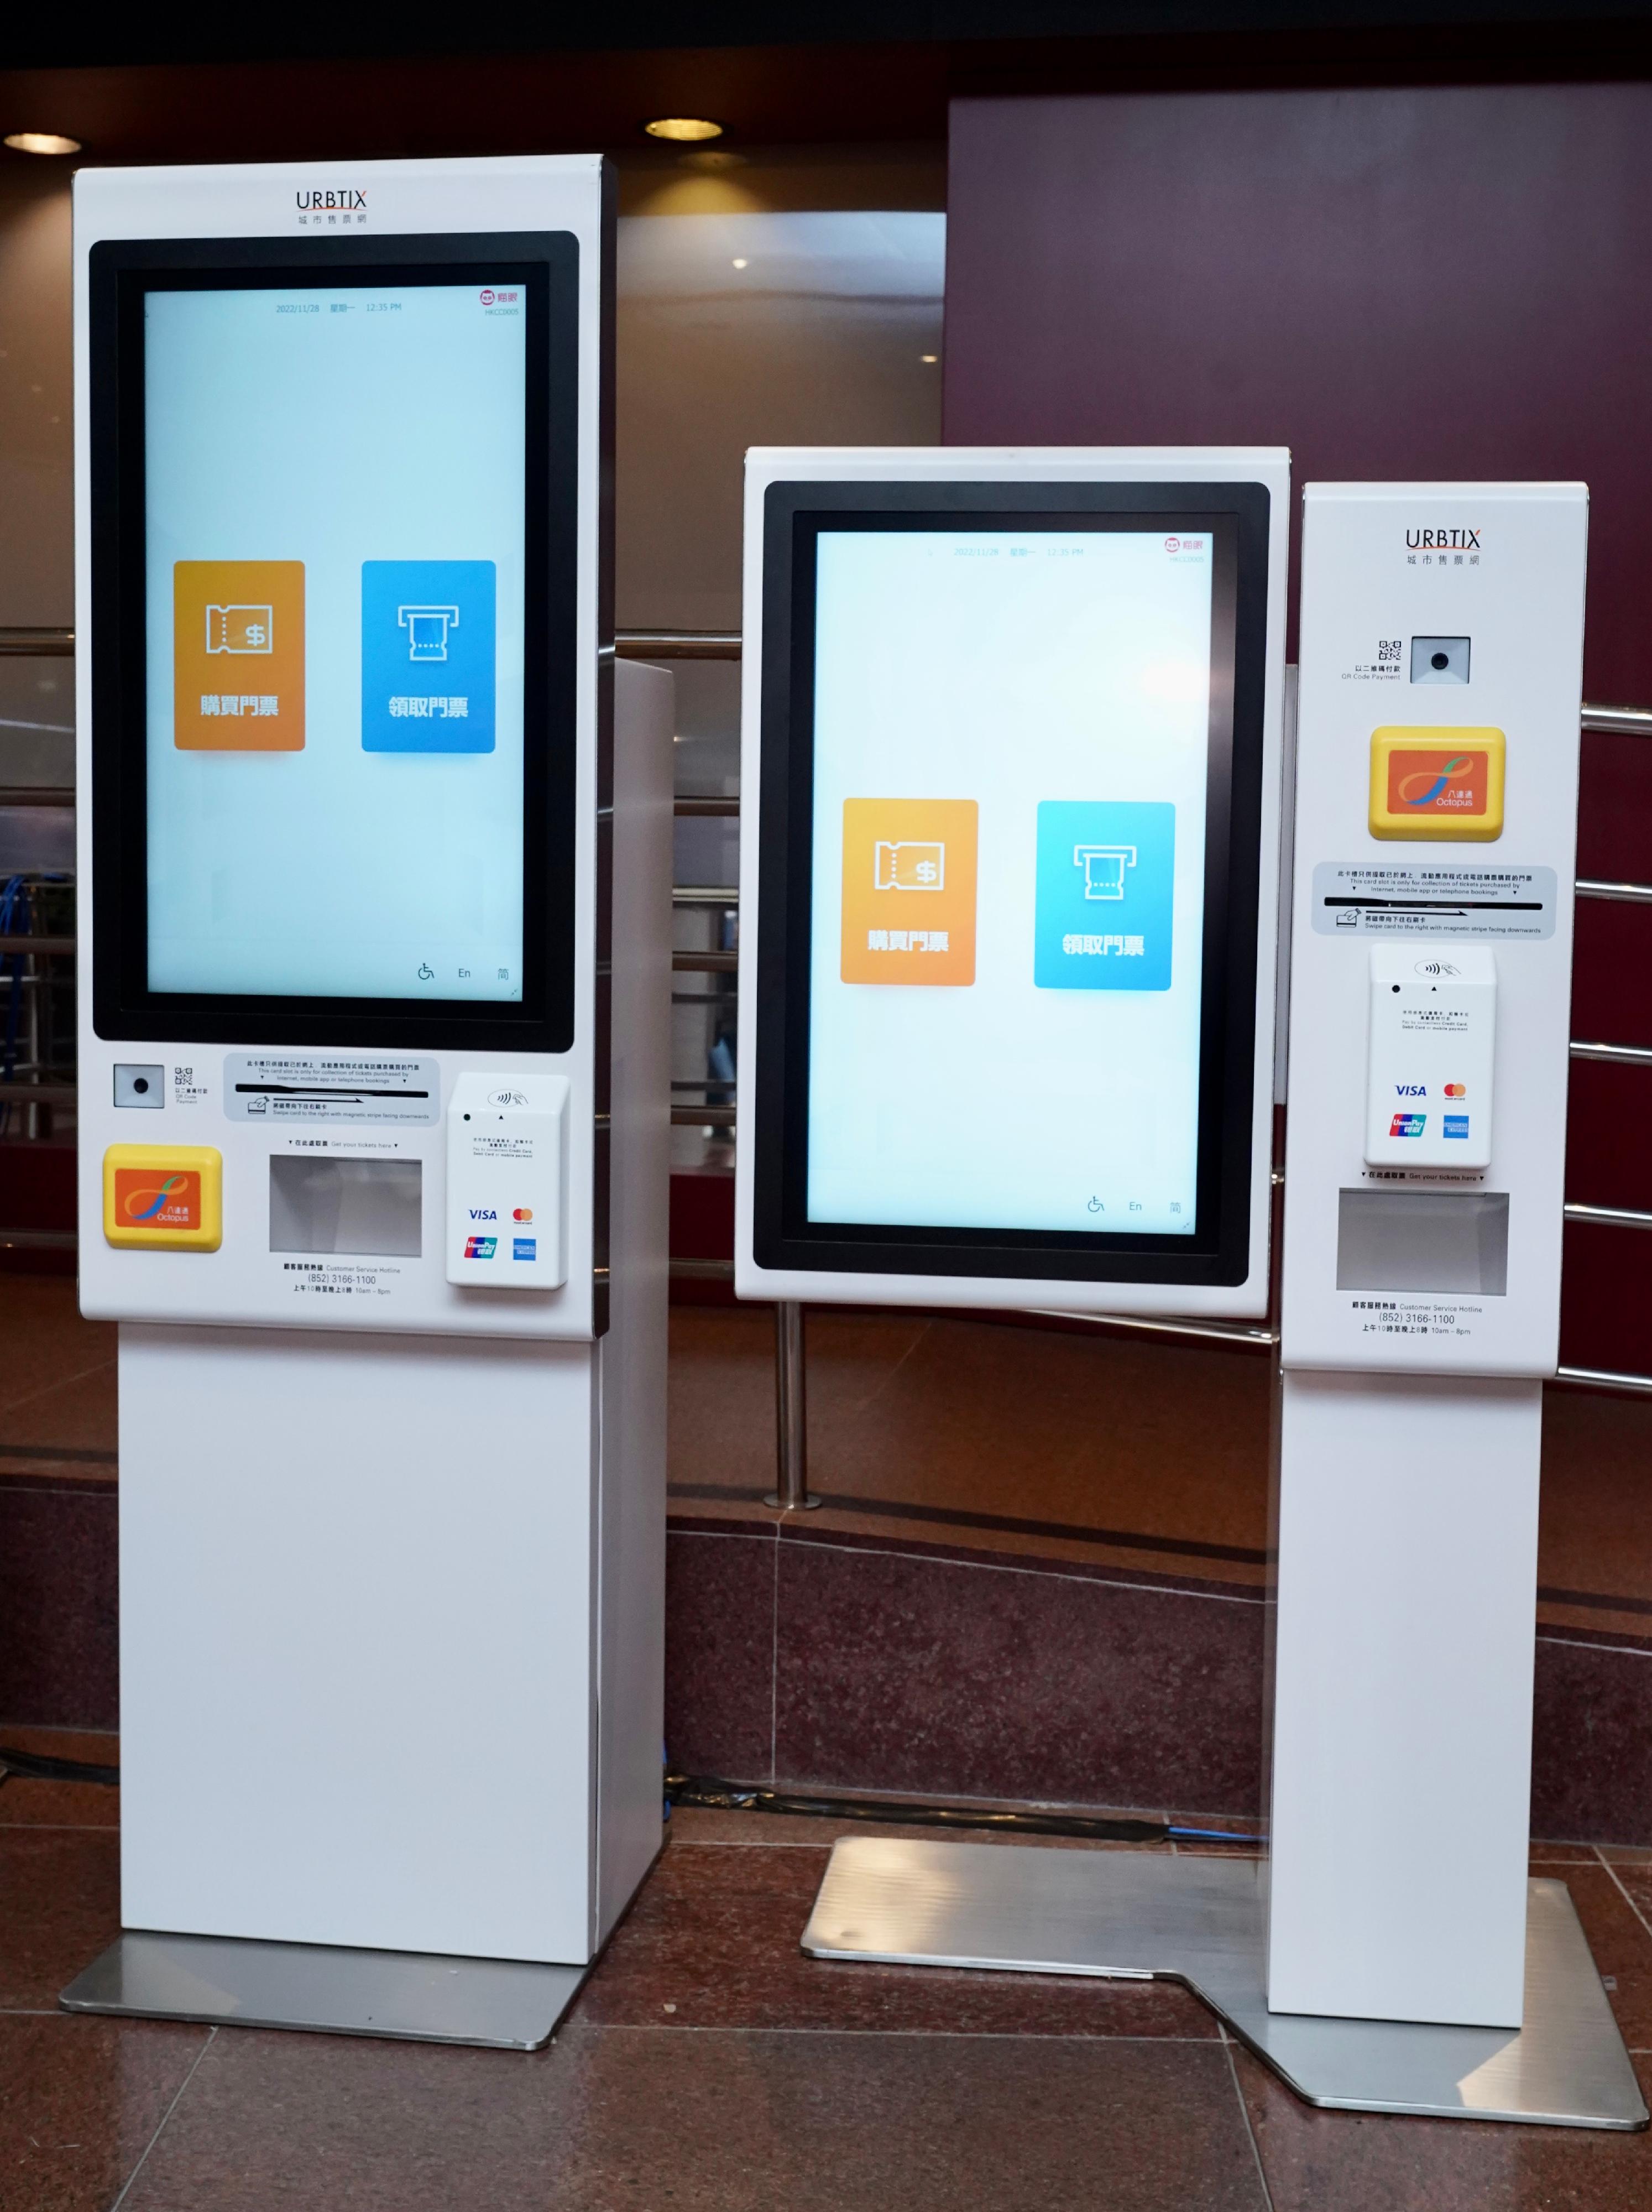 The Leisure and Cultural Services Department (LCSD) will launch a new URBTIX ticketing system this Thursday (December 1) to provide an enlarged system capacity and enhanced capabilities along with a revamped website (www.urbtix.hk), a brand new "URBTIX" mobile ticketing app and newly introduced self-service ticketing kiosks. Photo shows the newly introduced self-service ticketing kiosks, which will operate at various performance venues and major LCSD museums.